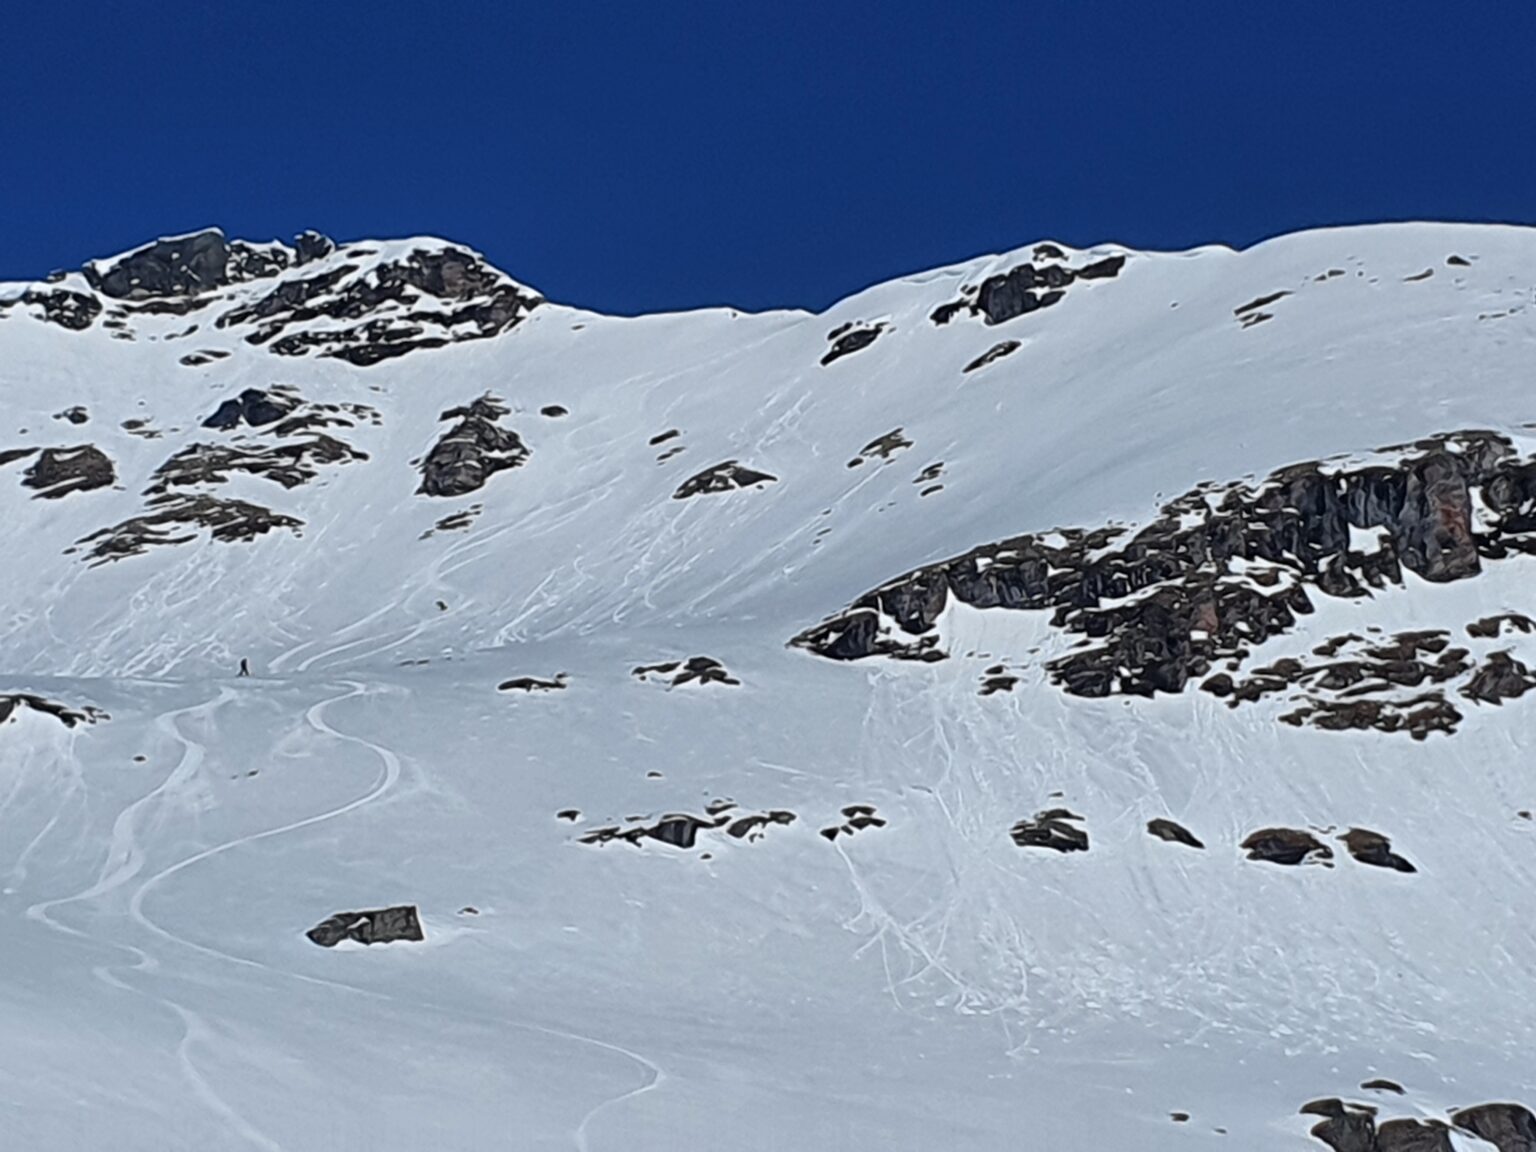 Looking at the southern face of Blåbærfjellet while snowboarding down